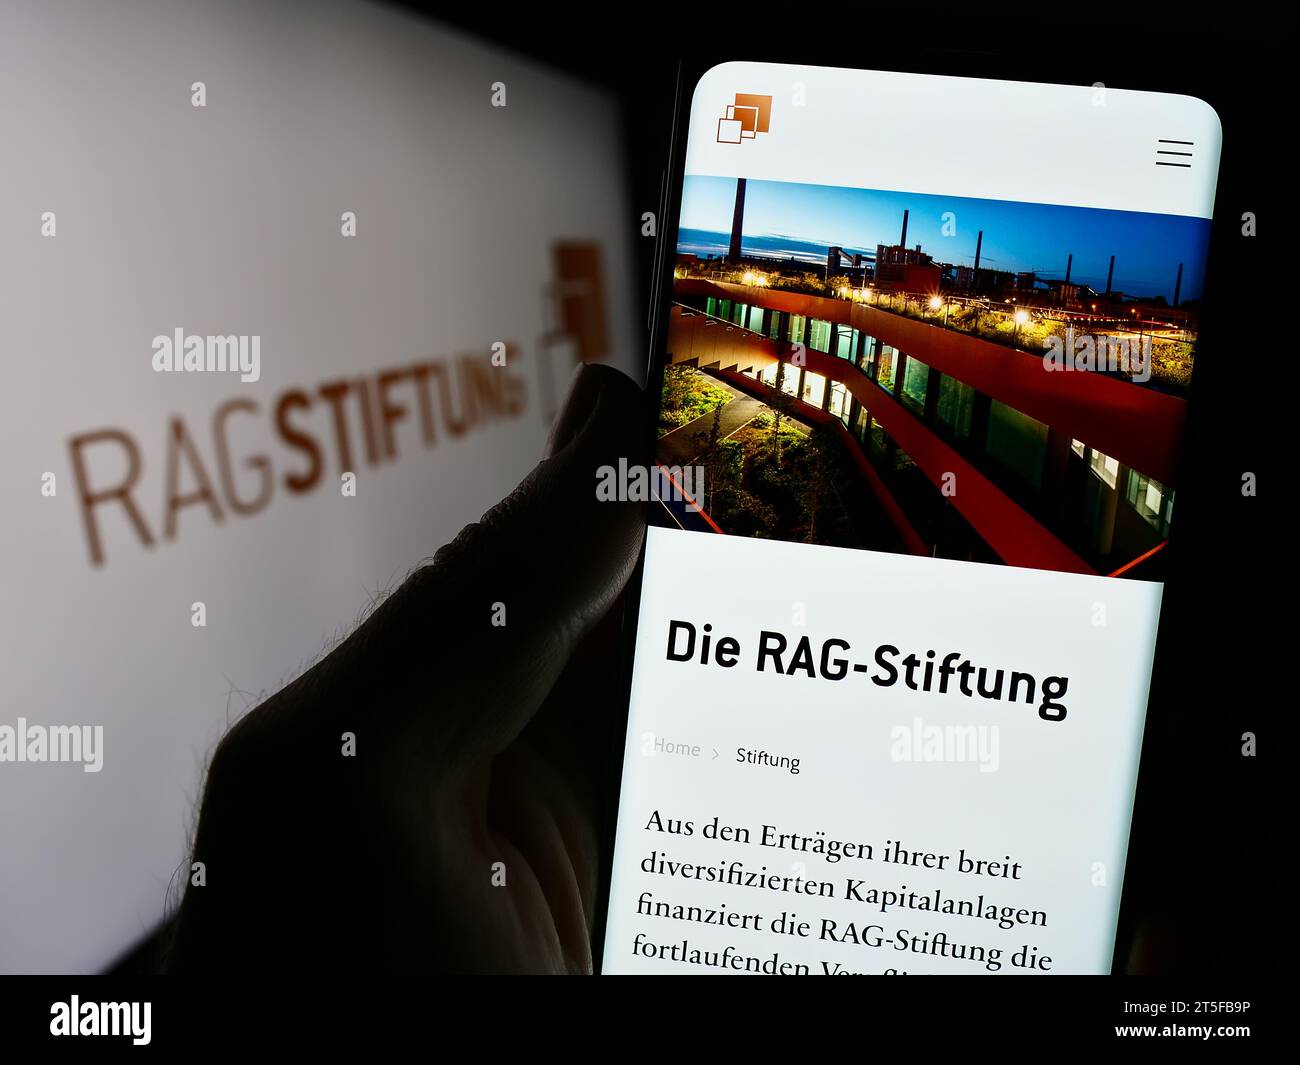 Person holding cellphone with website of German foundation RAG-Stiftung in front of logo. Focus on center of phone display. Stock Photo